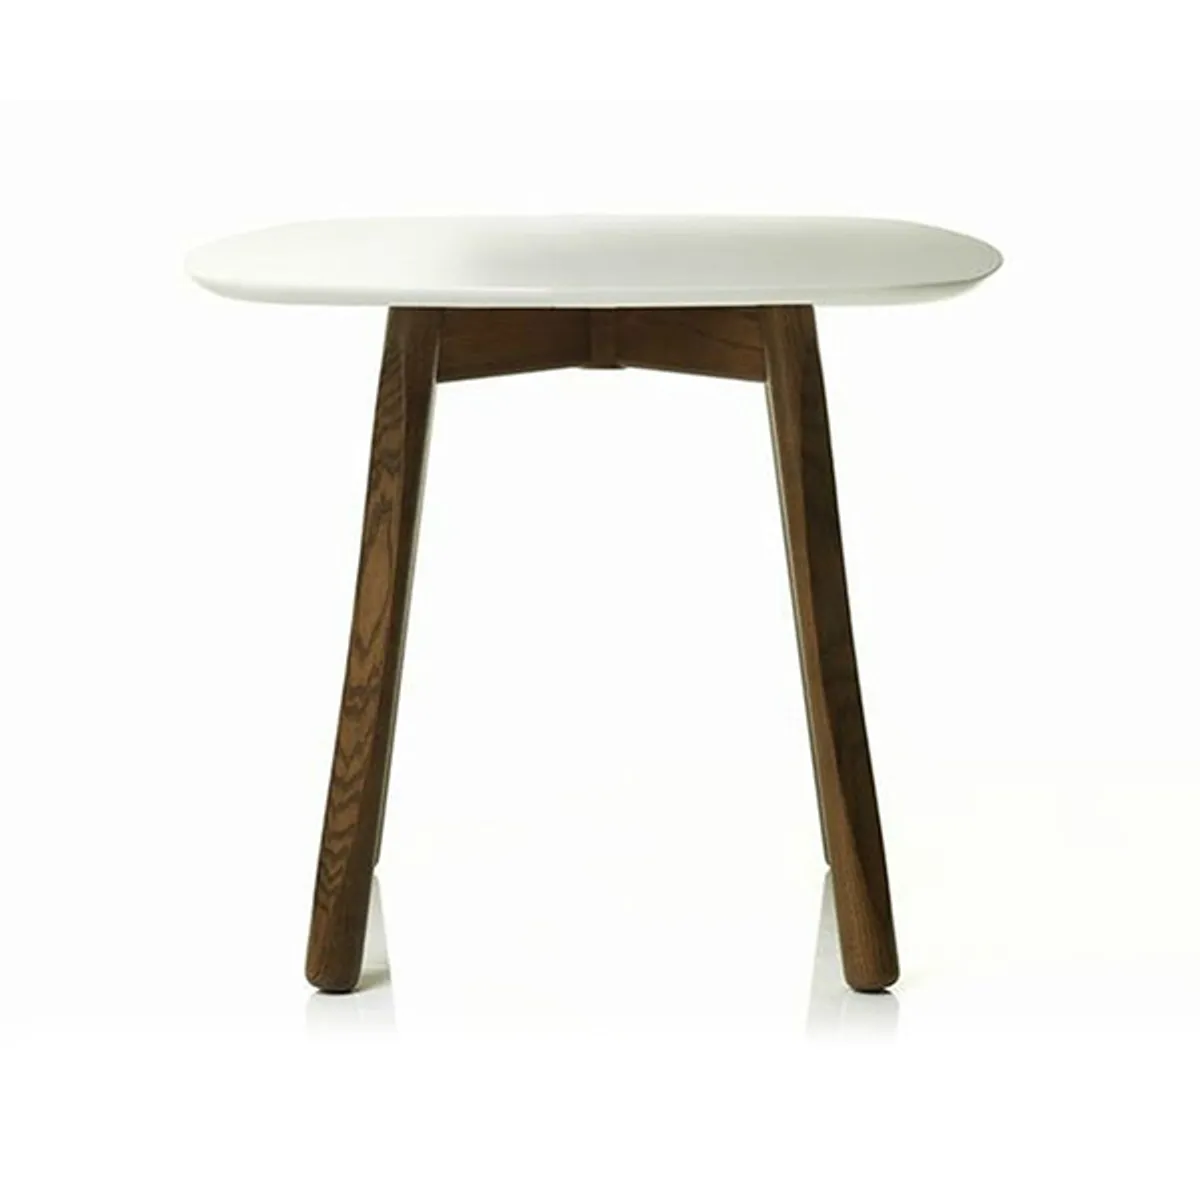 Marnie square table Inside Out Contracts2